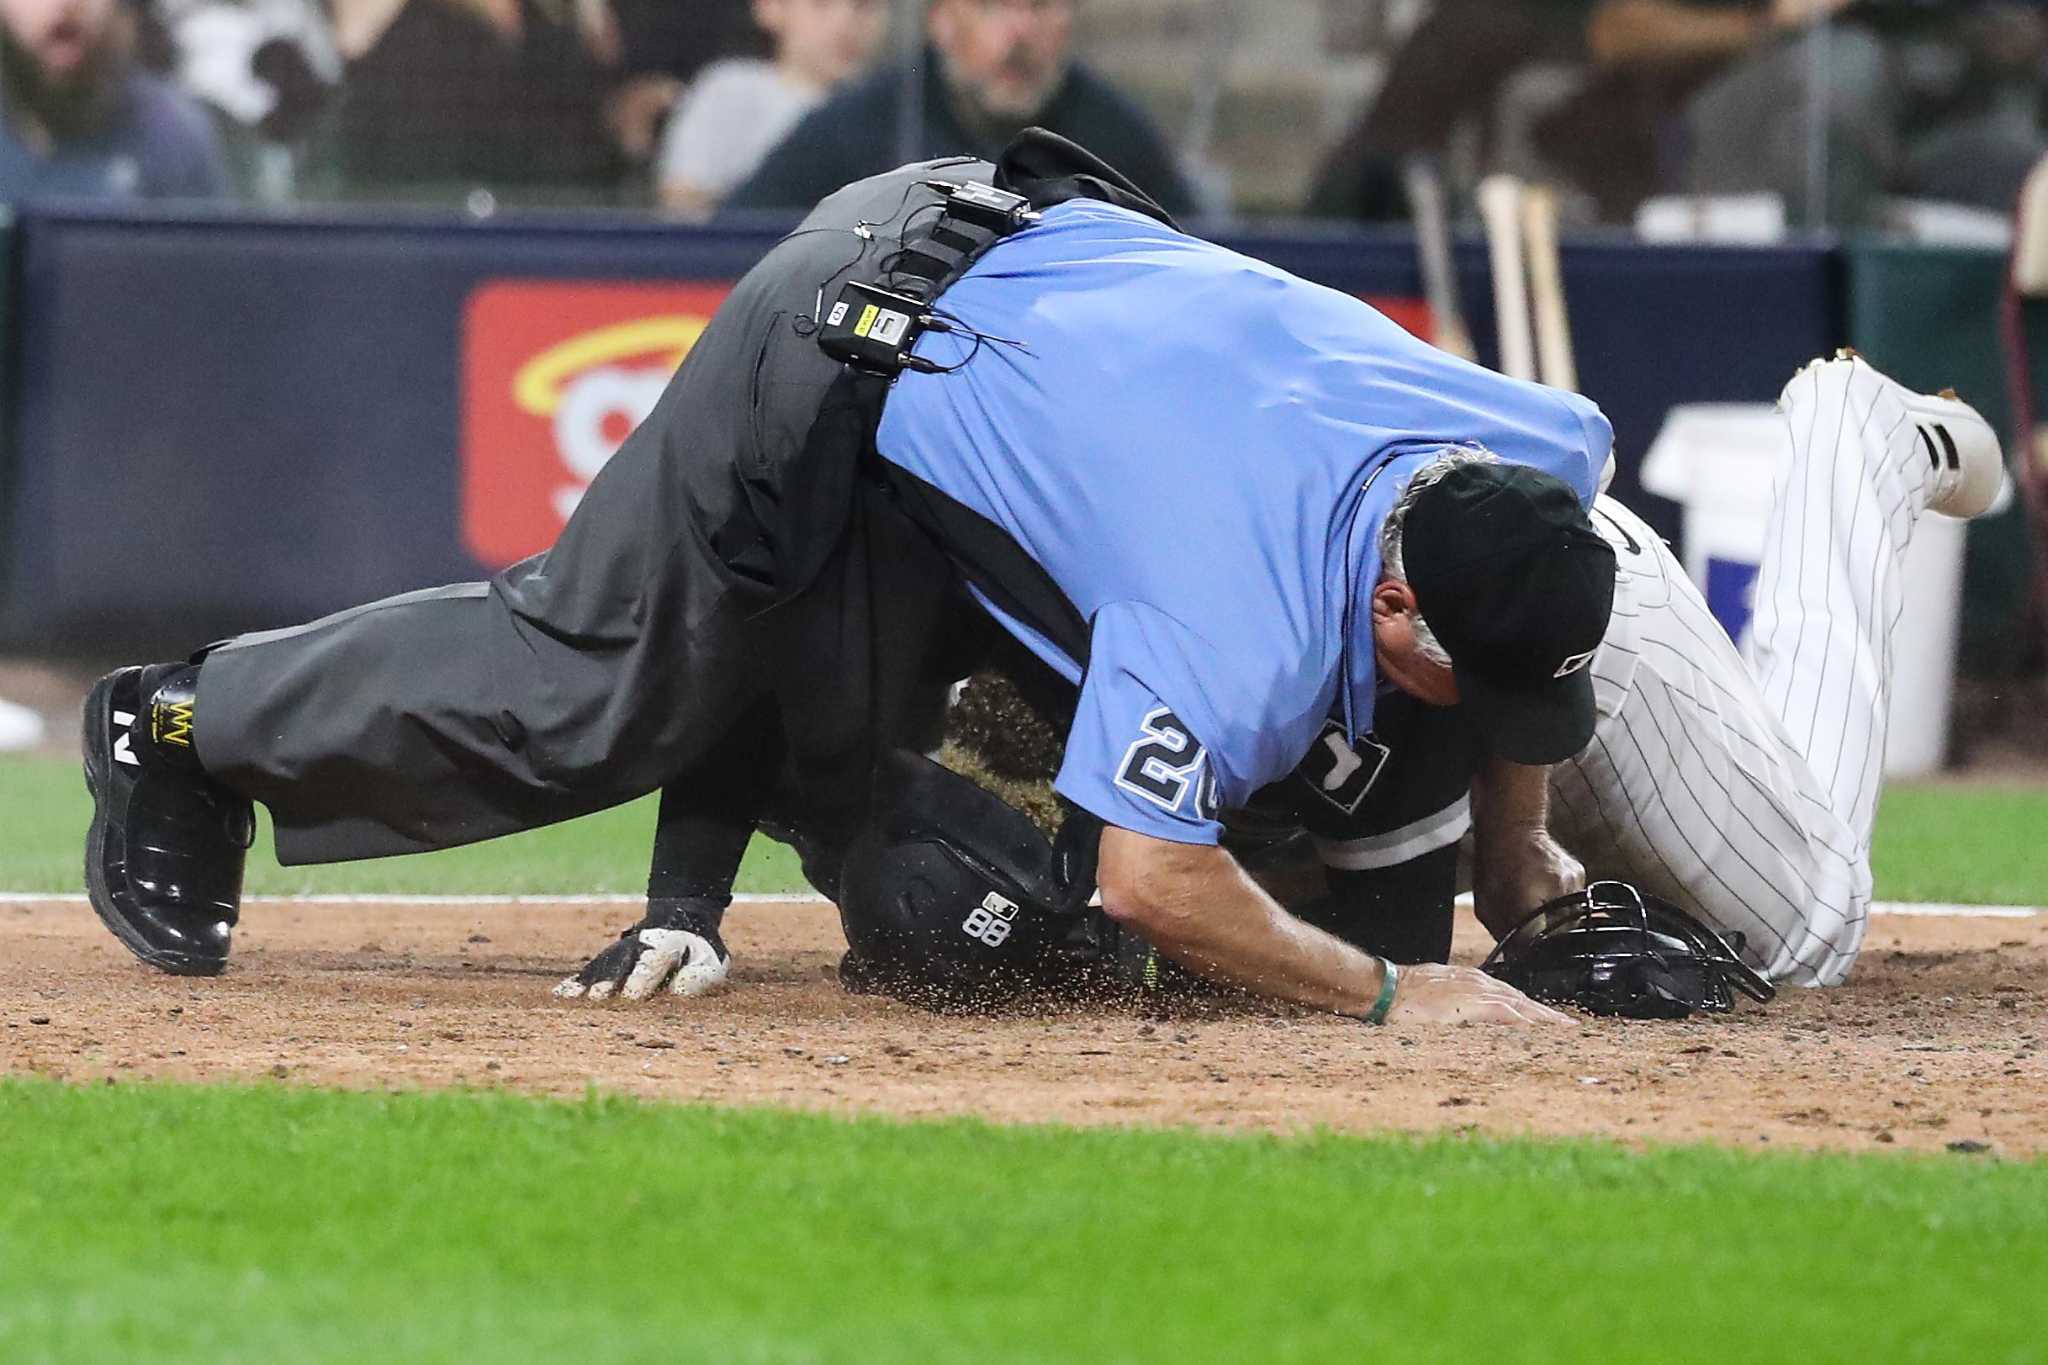 MLB Umpires Will Now Have to Answer For Their Sins and Announce